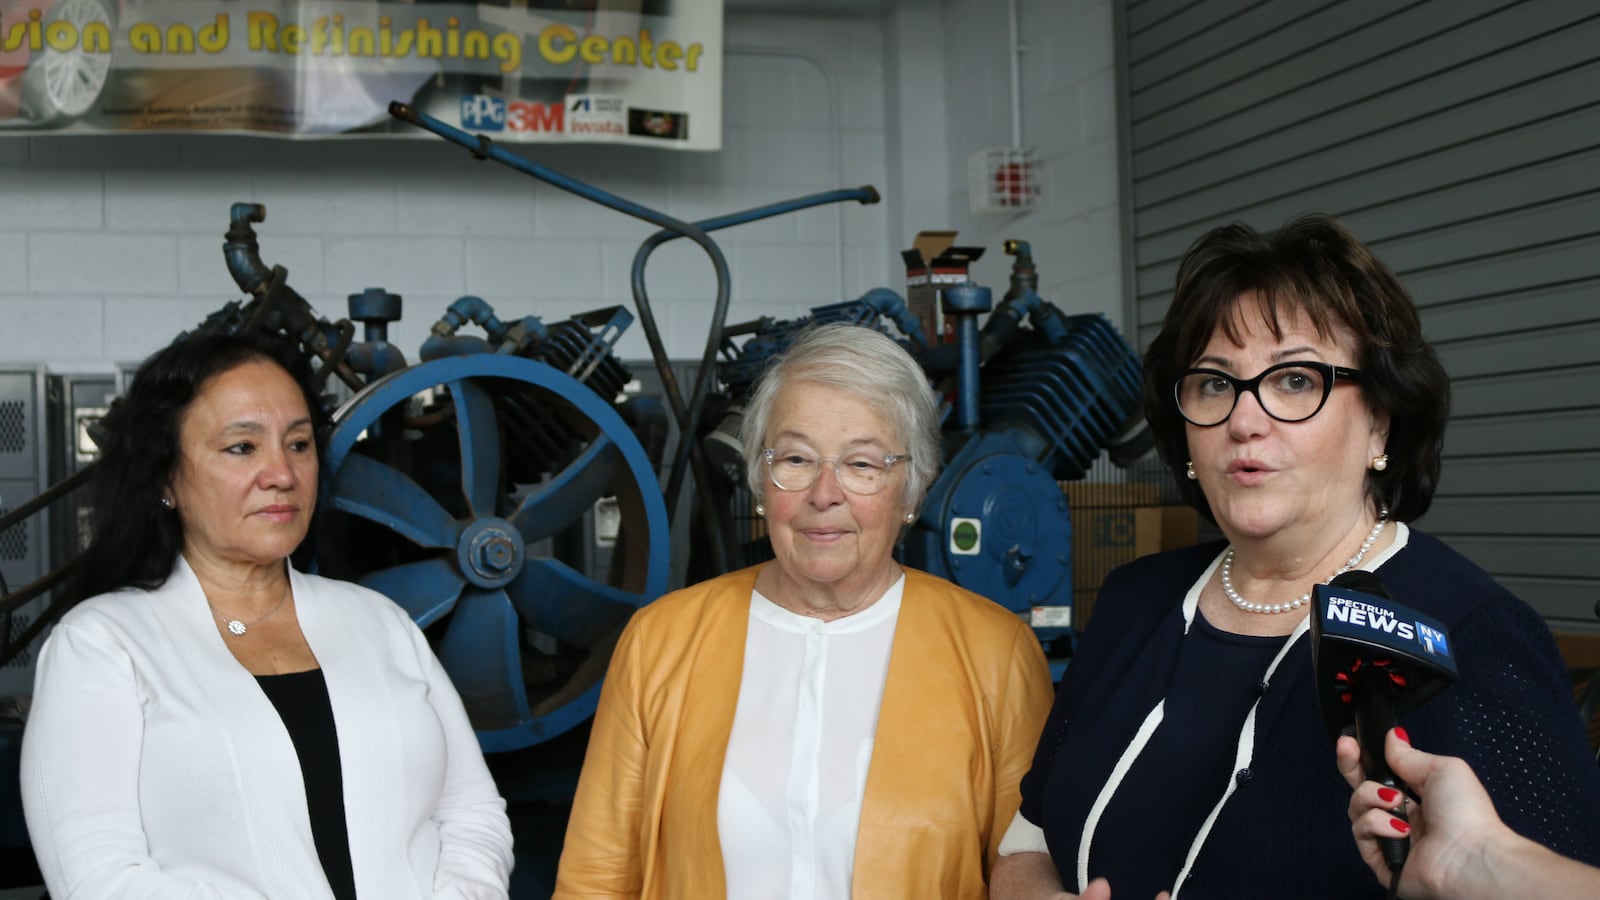 Board of Regents Chancellor Betty Rosa, New York City Schools Chancellor Carmen Fariña and State Education Commissioner MaryEllen Elia at Thomas A. Edison Career and Technical Education High School